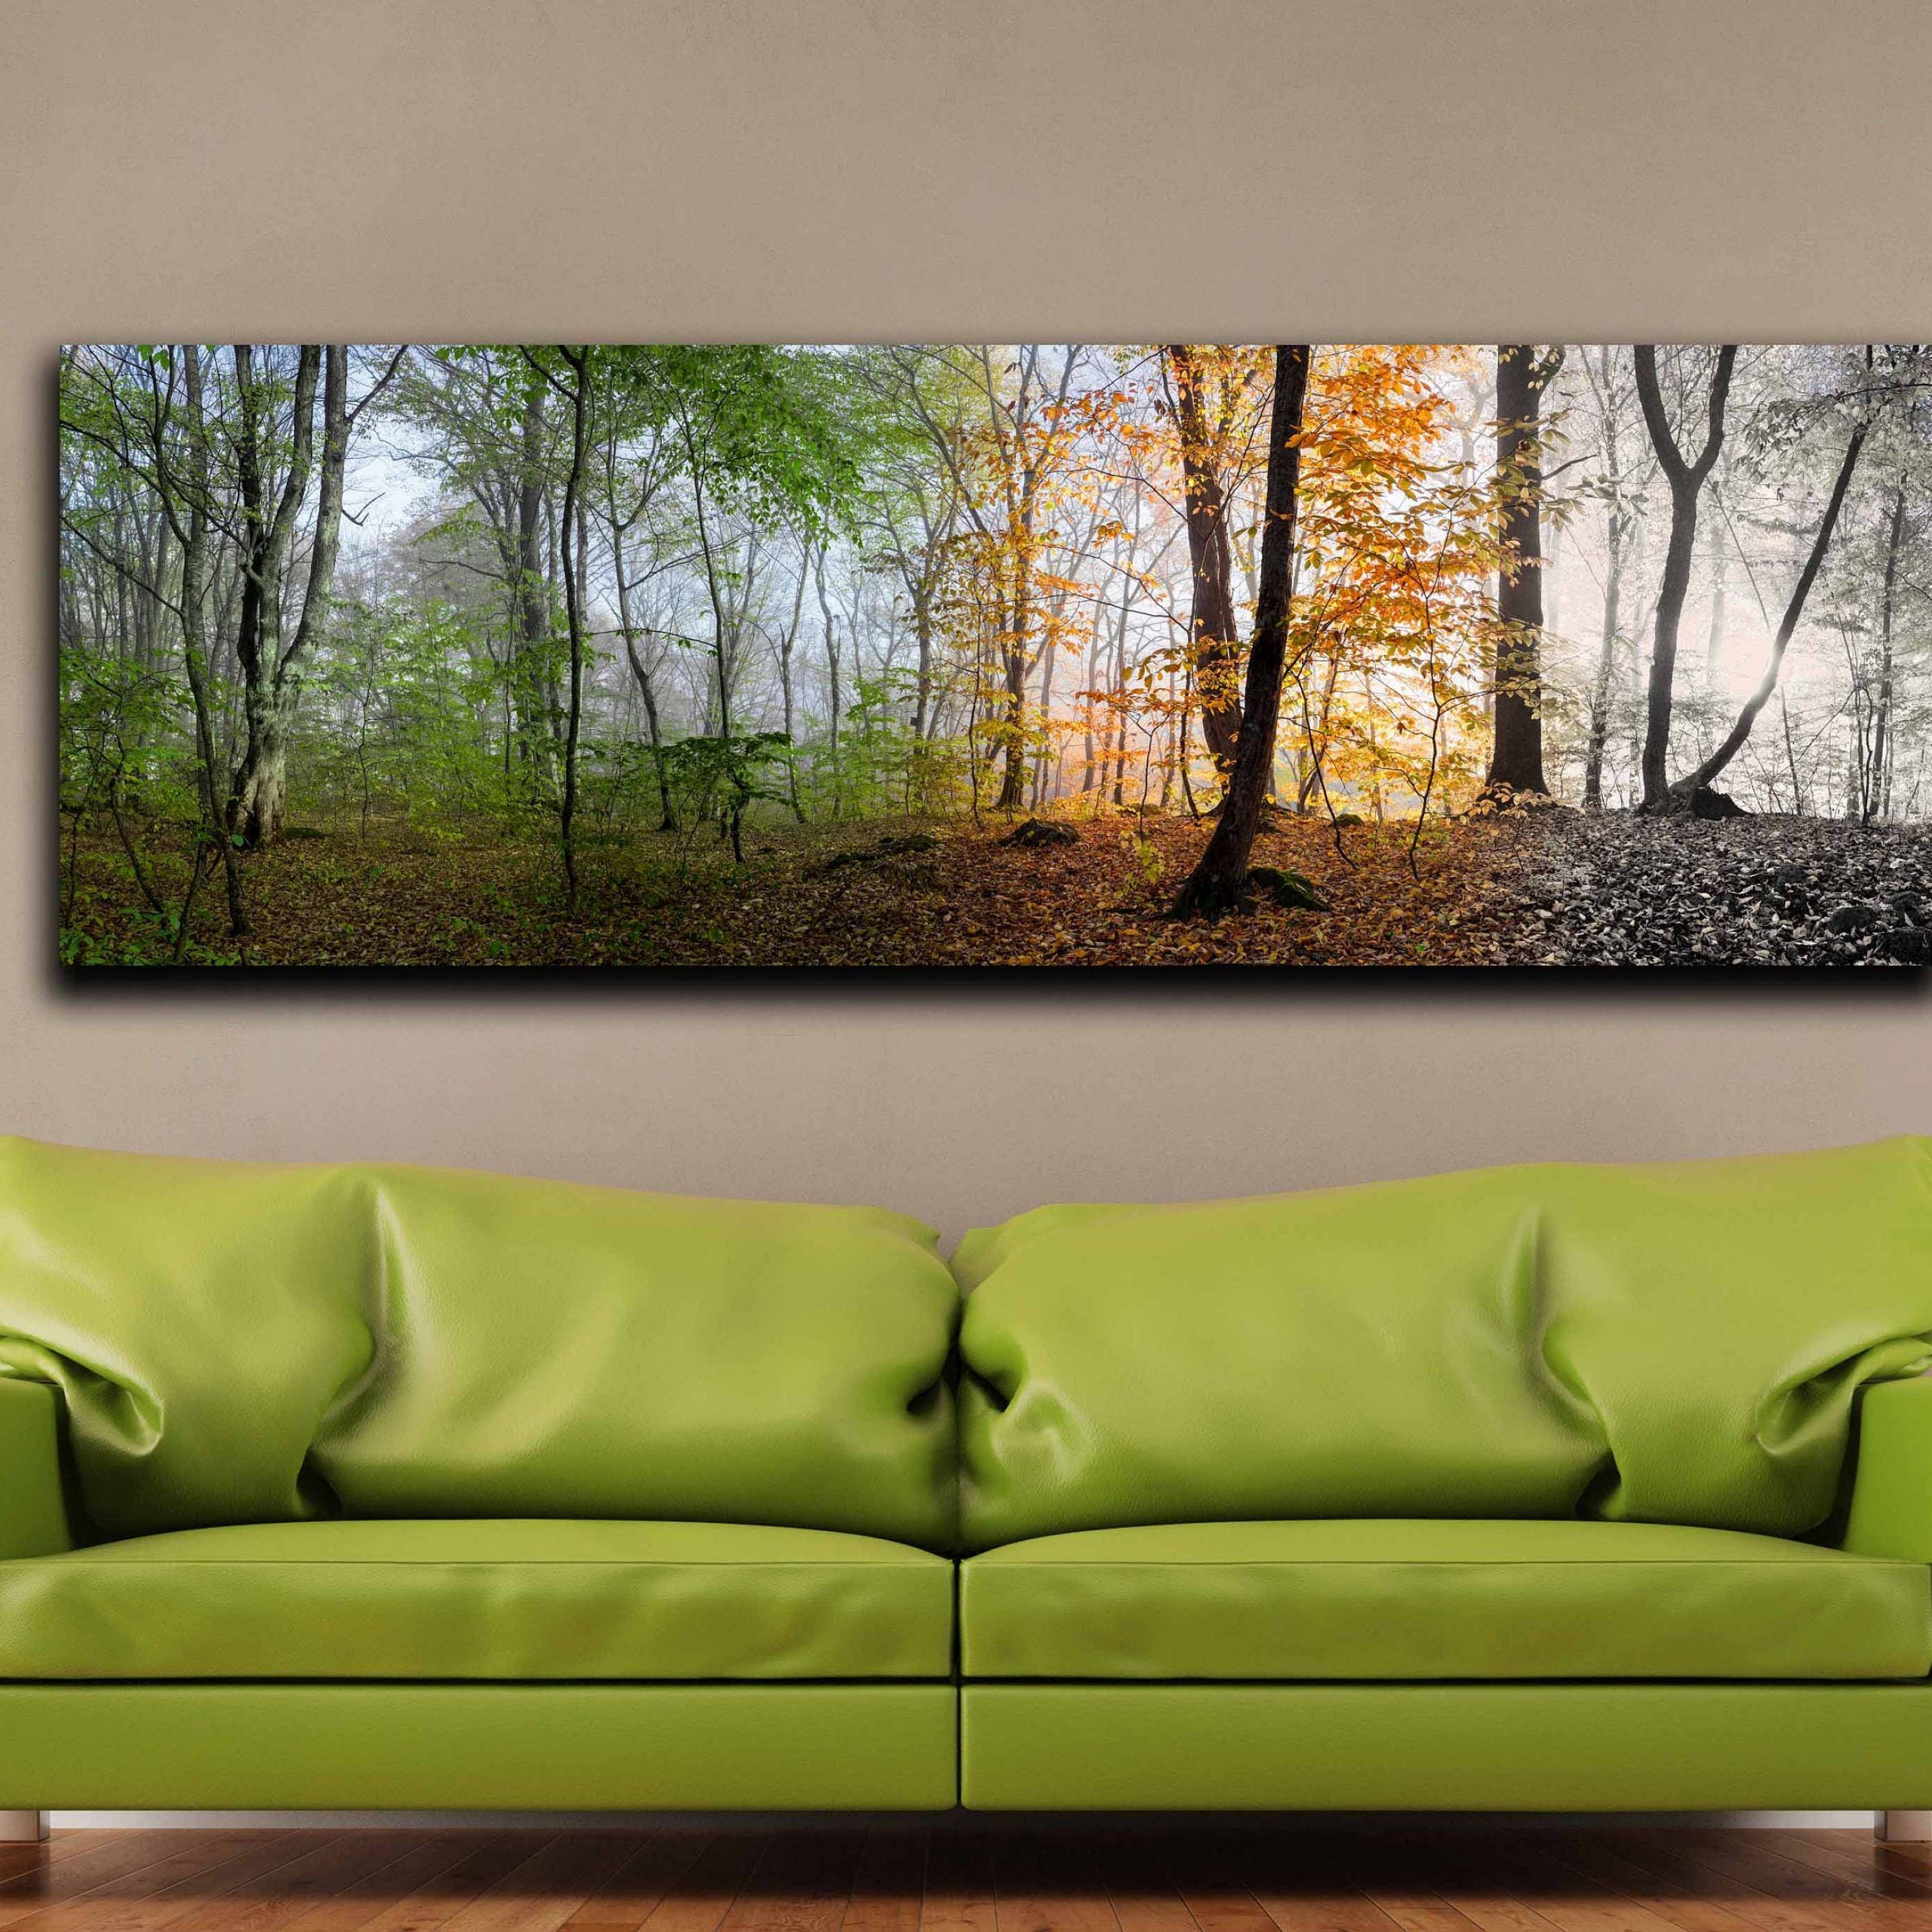 Seasons Art,4 Season Wall Art,seasons Wall Art,landscape Within Landscape Wall Art (View 13 of 15)